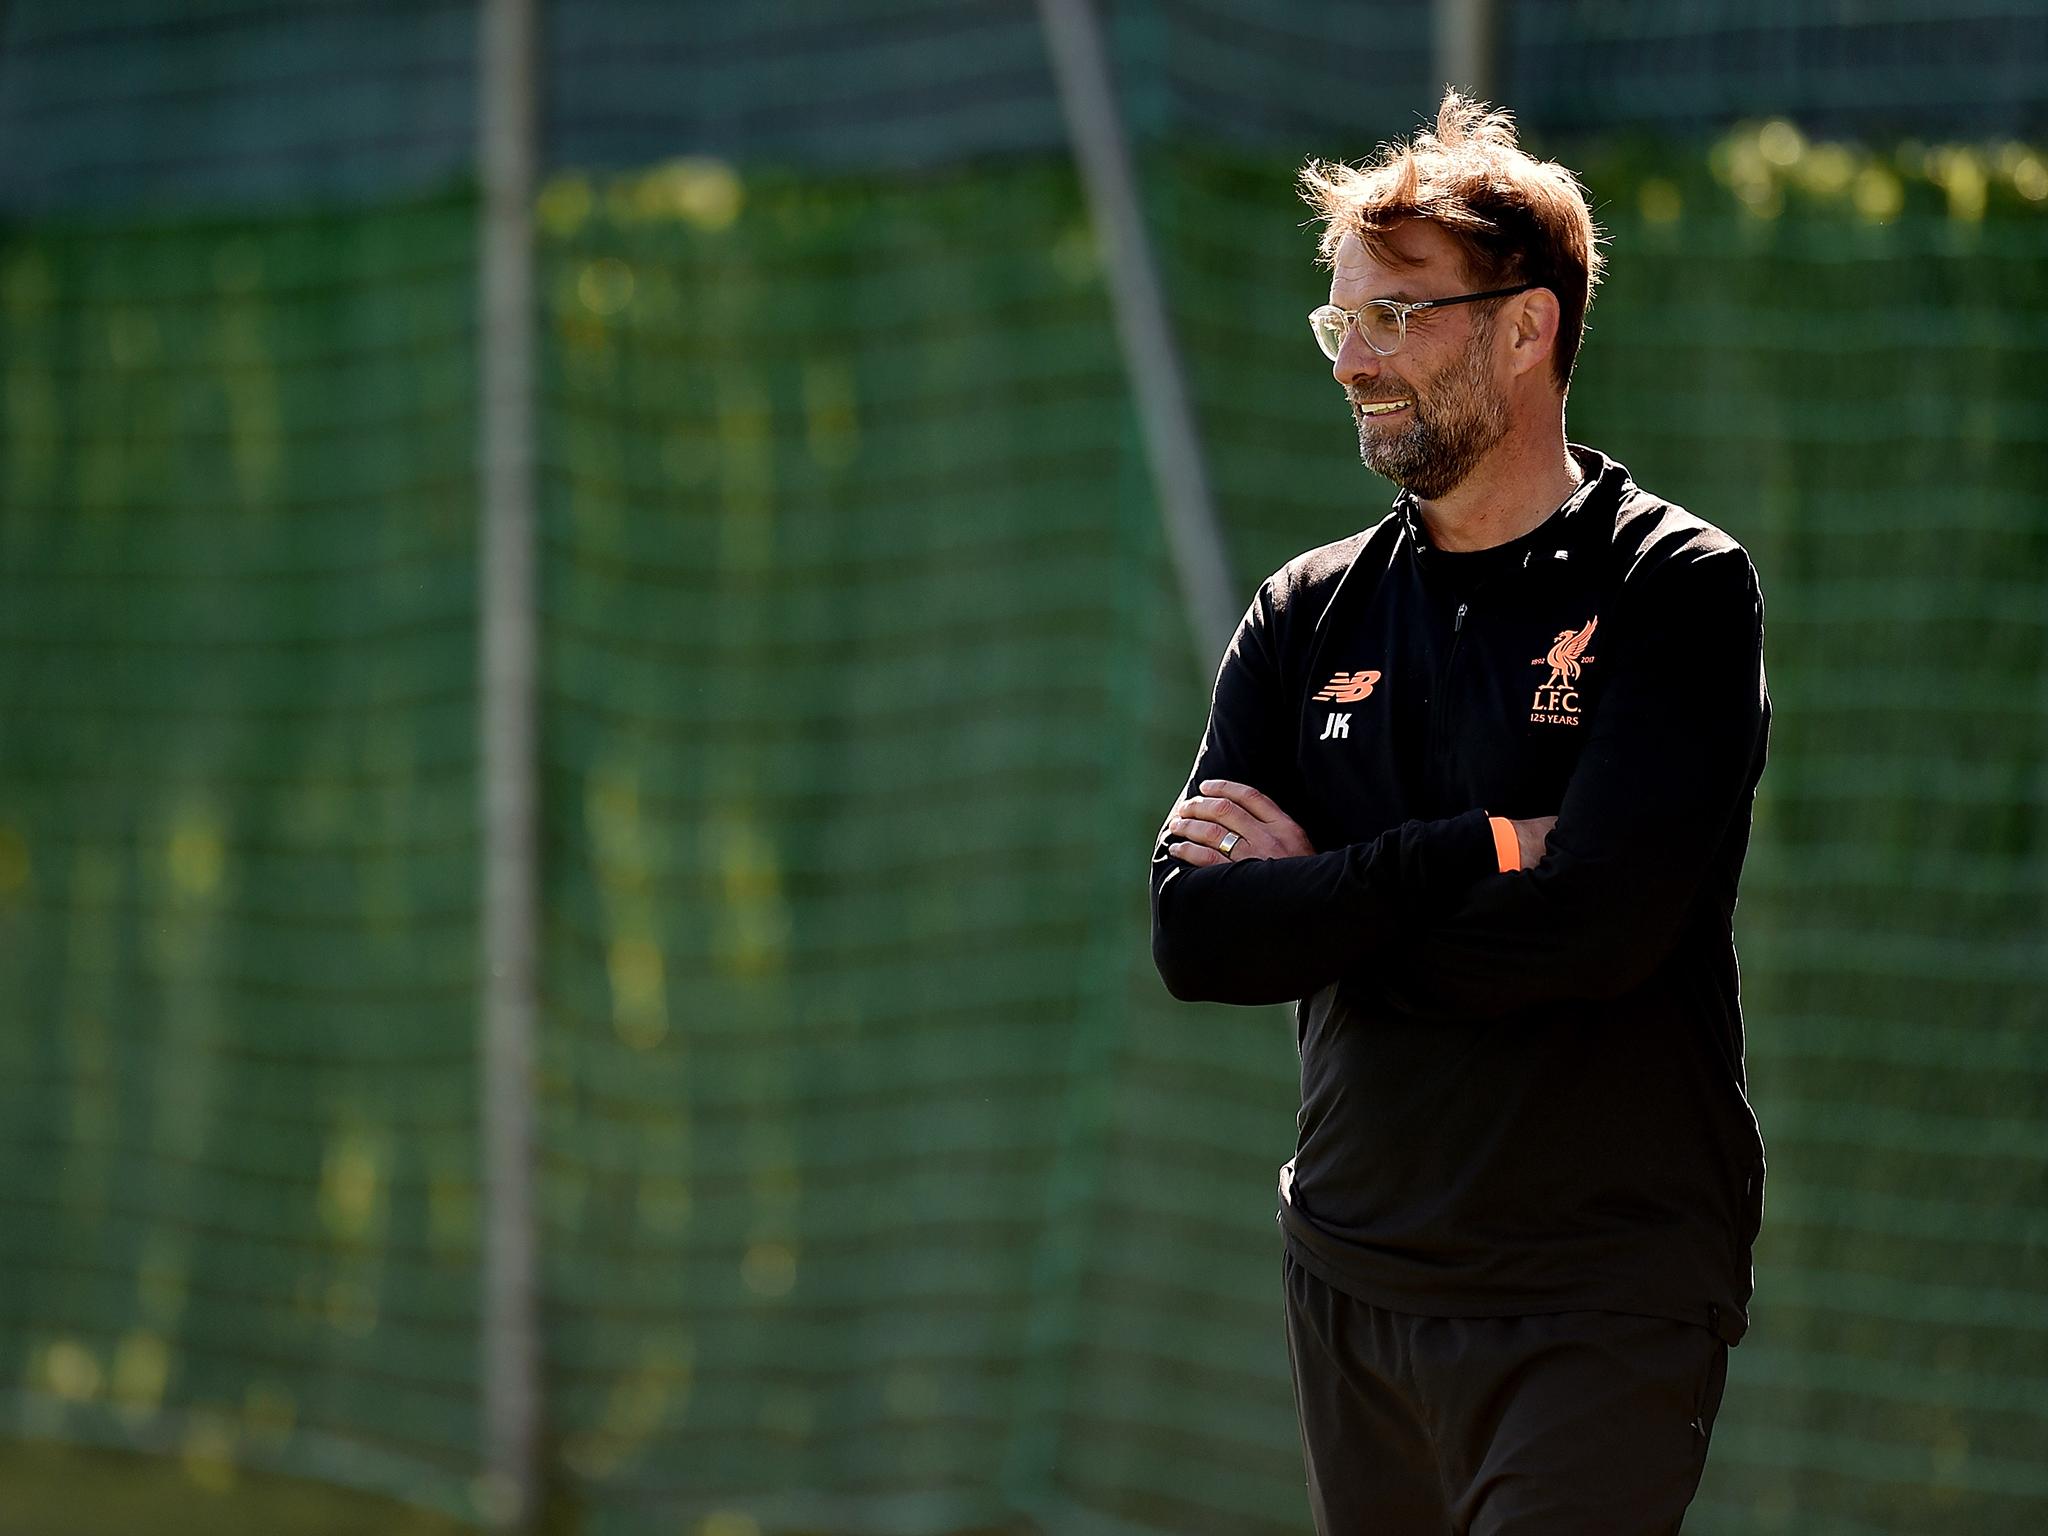 Jürgen Klopp admitted it is a relief not having to face Zinedine Zidane on the pitch in the Champions League final